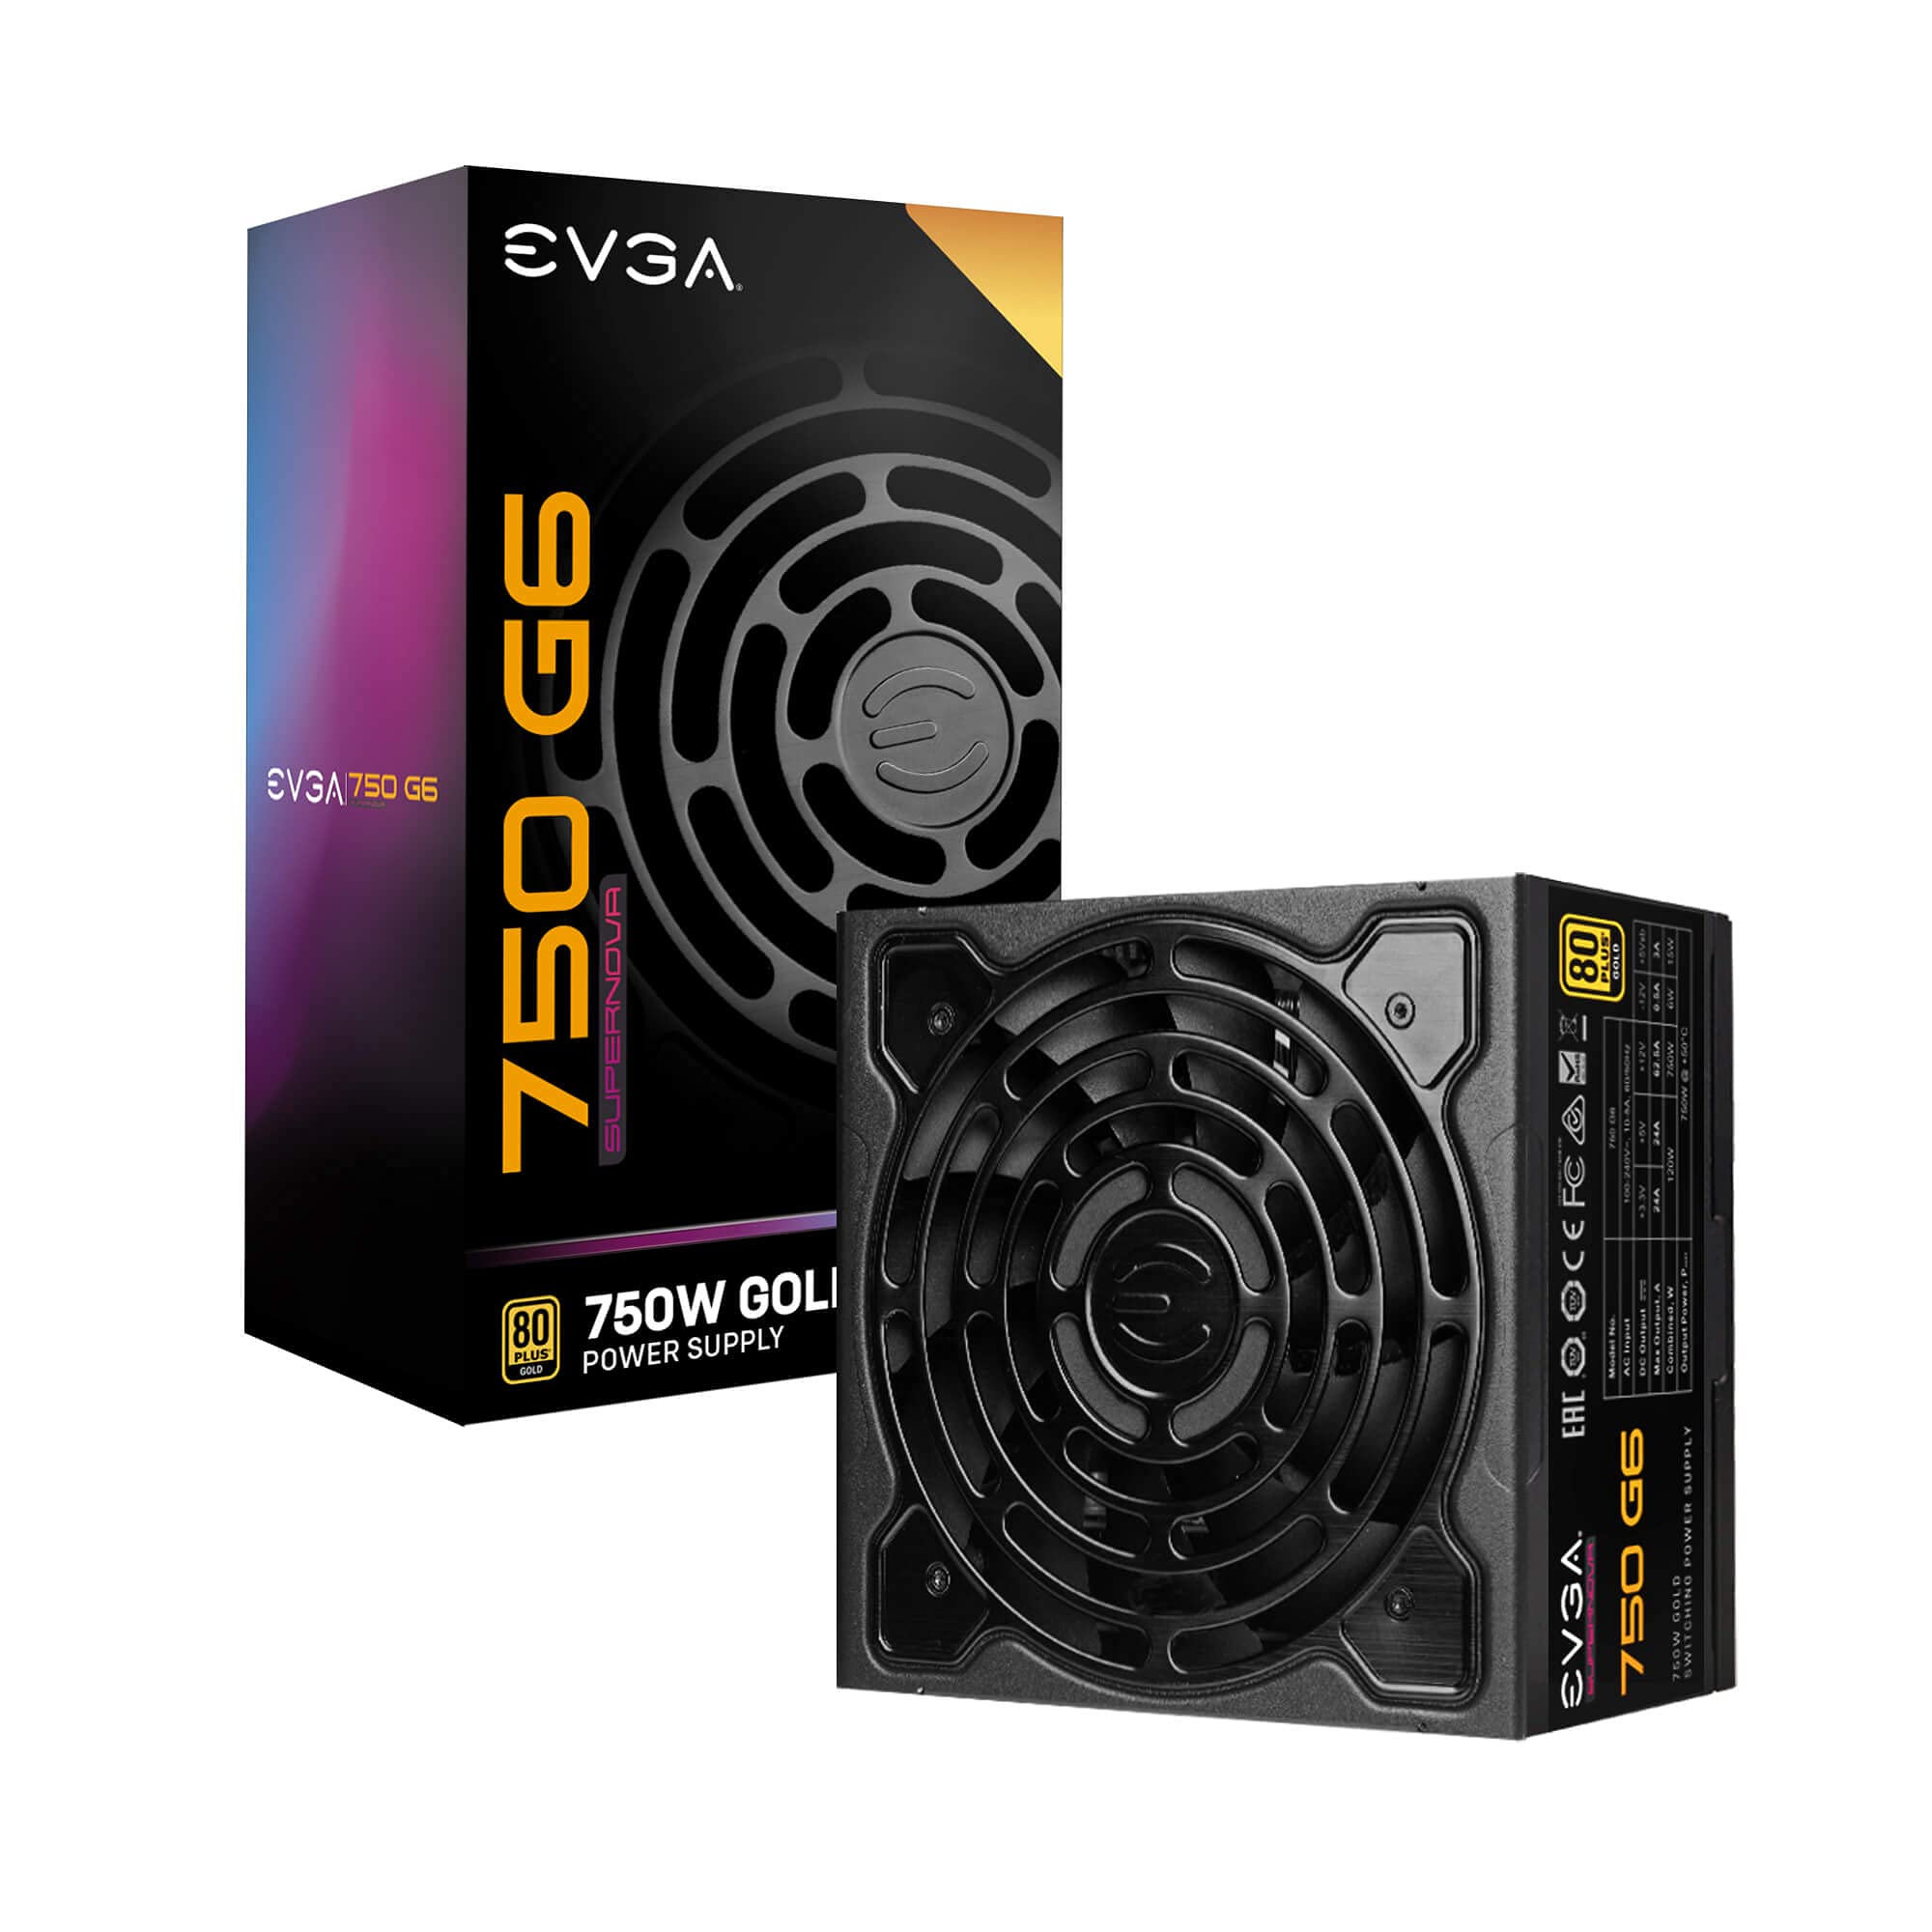 EVGA SuperNOVA 750 G6, 80 Plus Gold 750W, Fully Modular, Eco Mode with FDB Fan, 10 Year Warranty, Includes Power ON Self Tester, Compact 140mm Size, Power Supply 220-G6-0750-X1